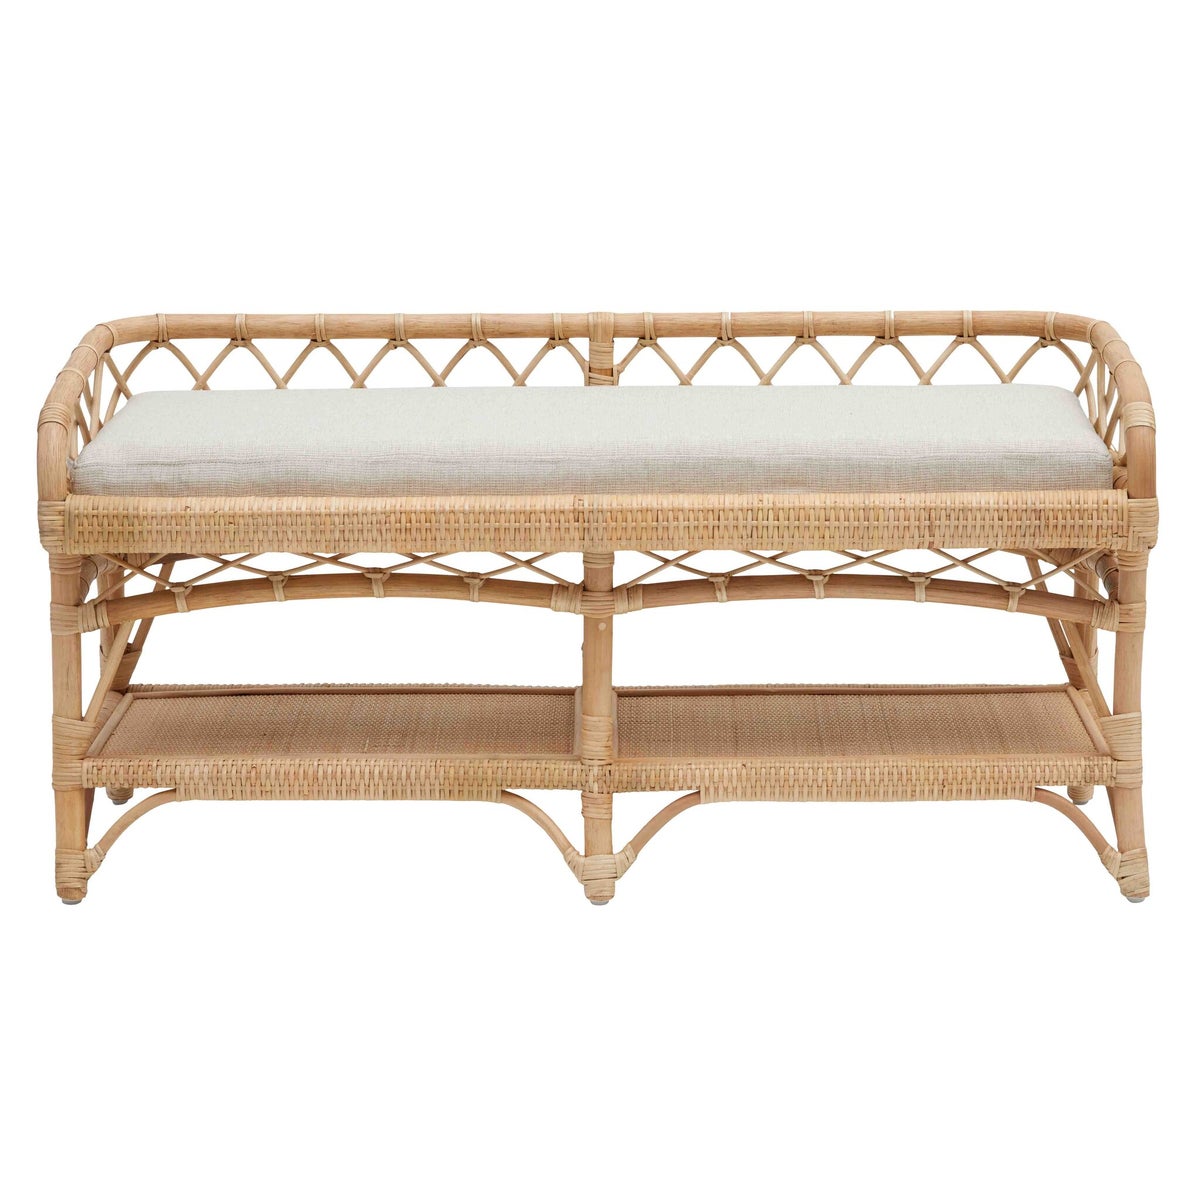 Charleston 48" Bench Unpainted - "Select Your Color" Rattan Frame with Rattan Peel WrapsCushion C